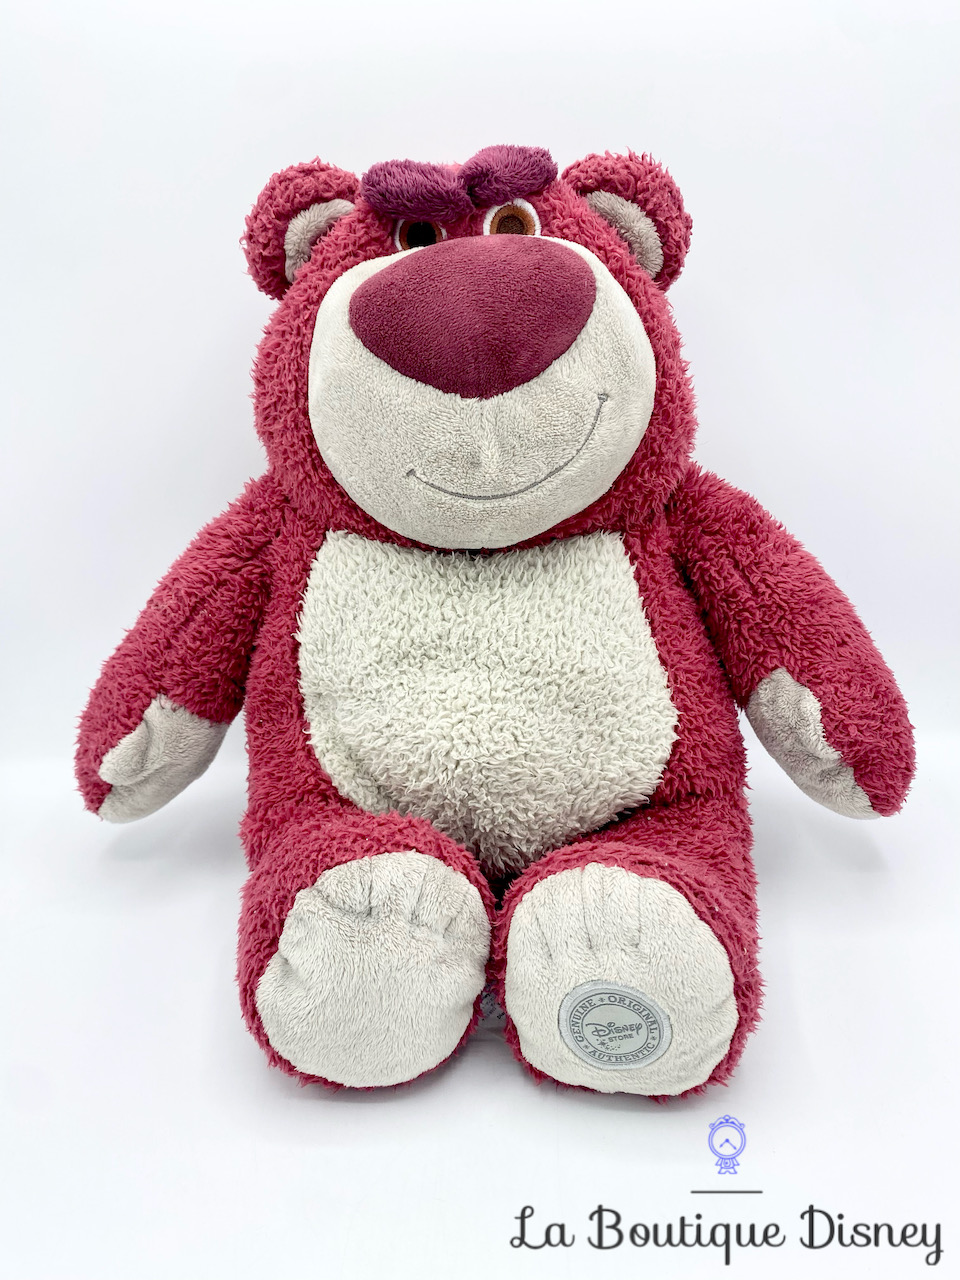 Peluche Lotso Toy Story Disney Store 2013 ours rose fraise 35 cm